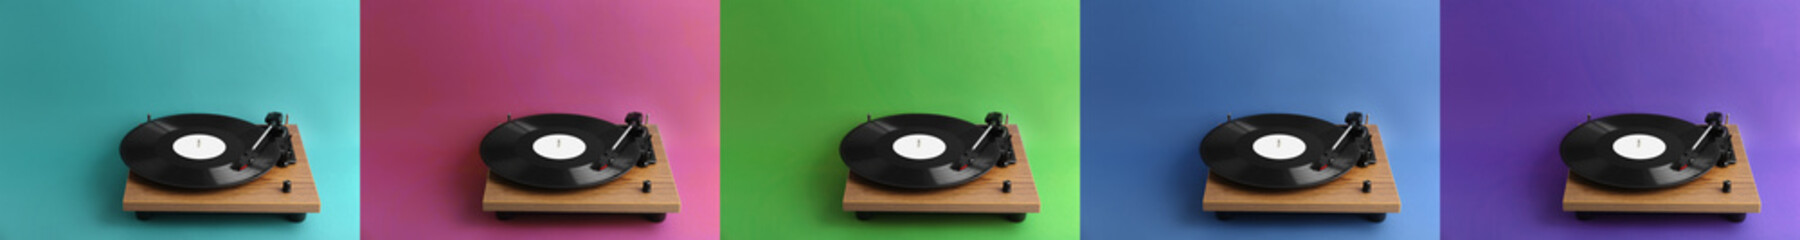 Collage of turntables with vinyl records on different color backgrounds. Banner design